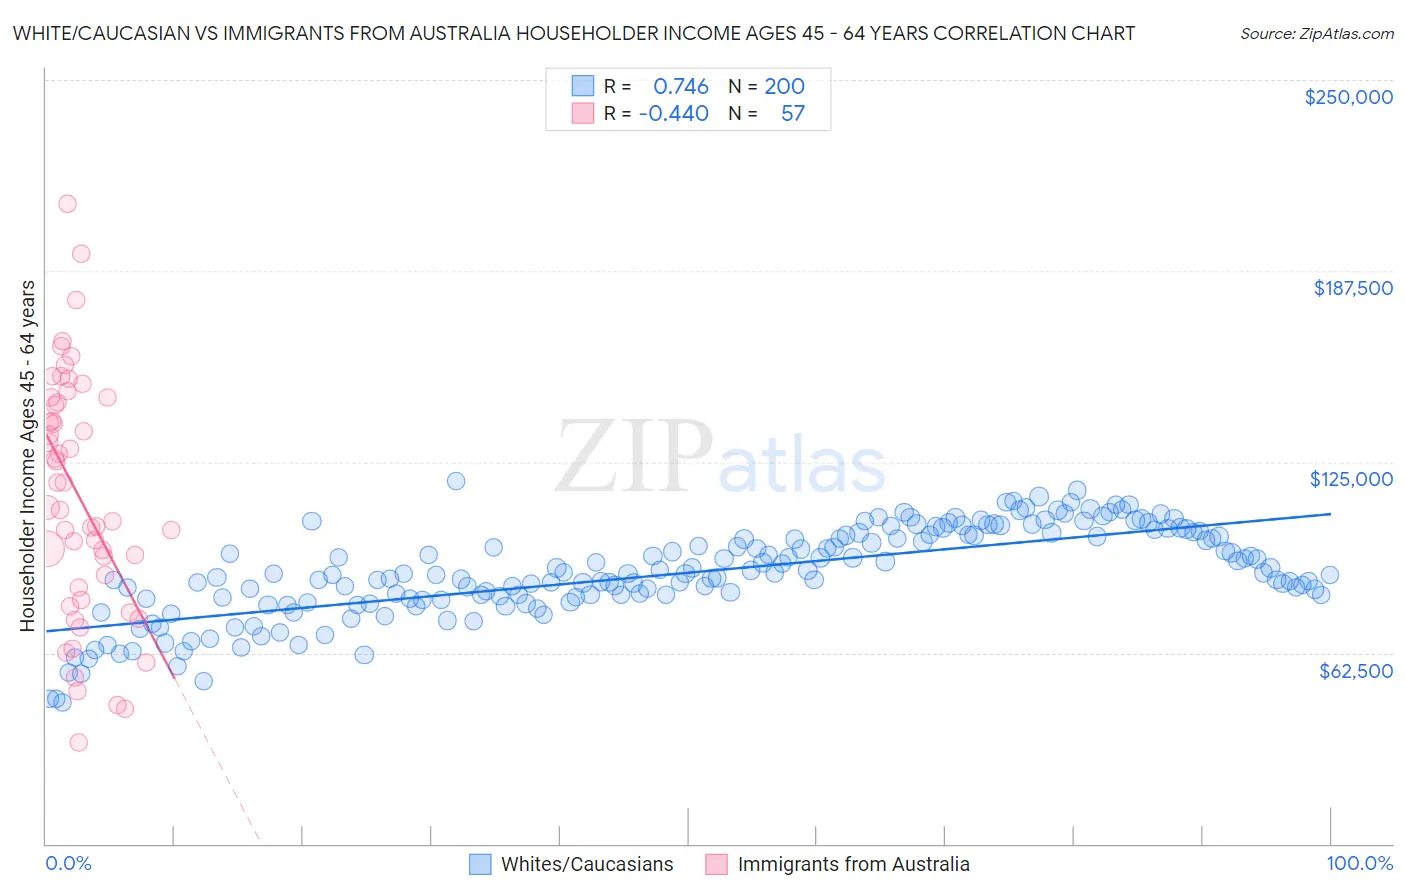 White/Caucasian vs Immigrants from Australia Householder Income Ages 45 - 64 years